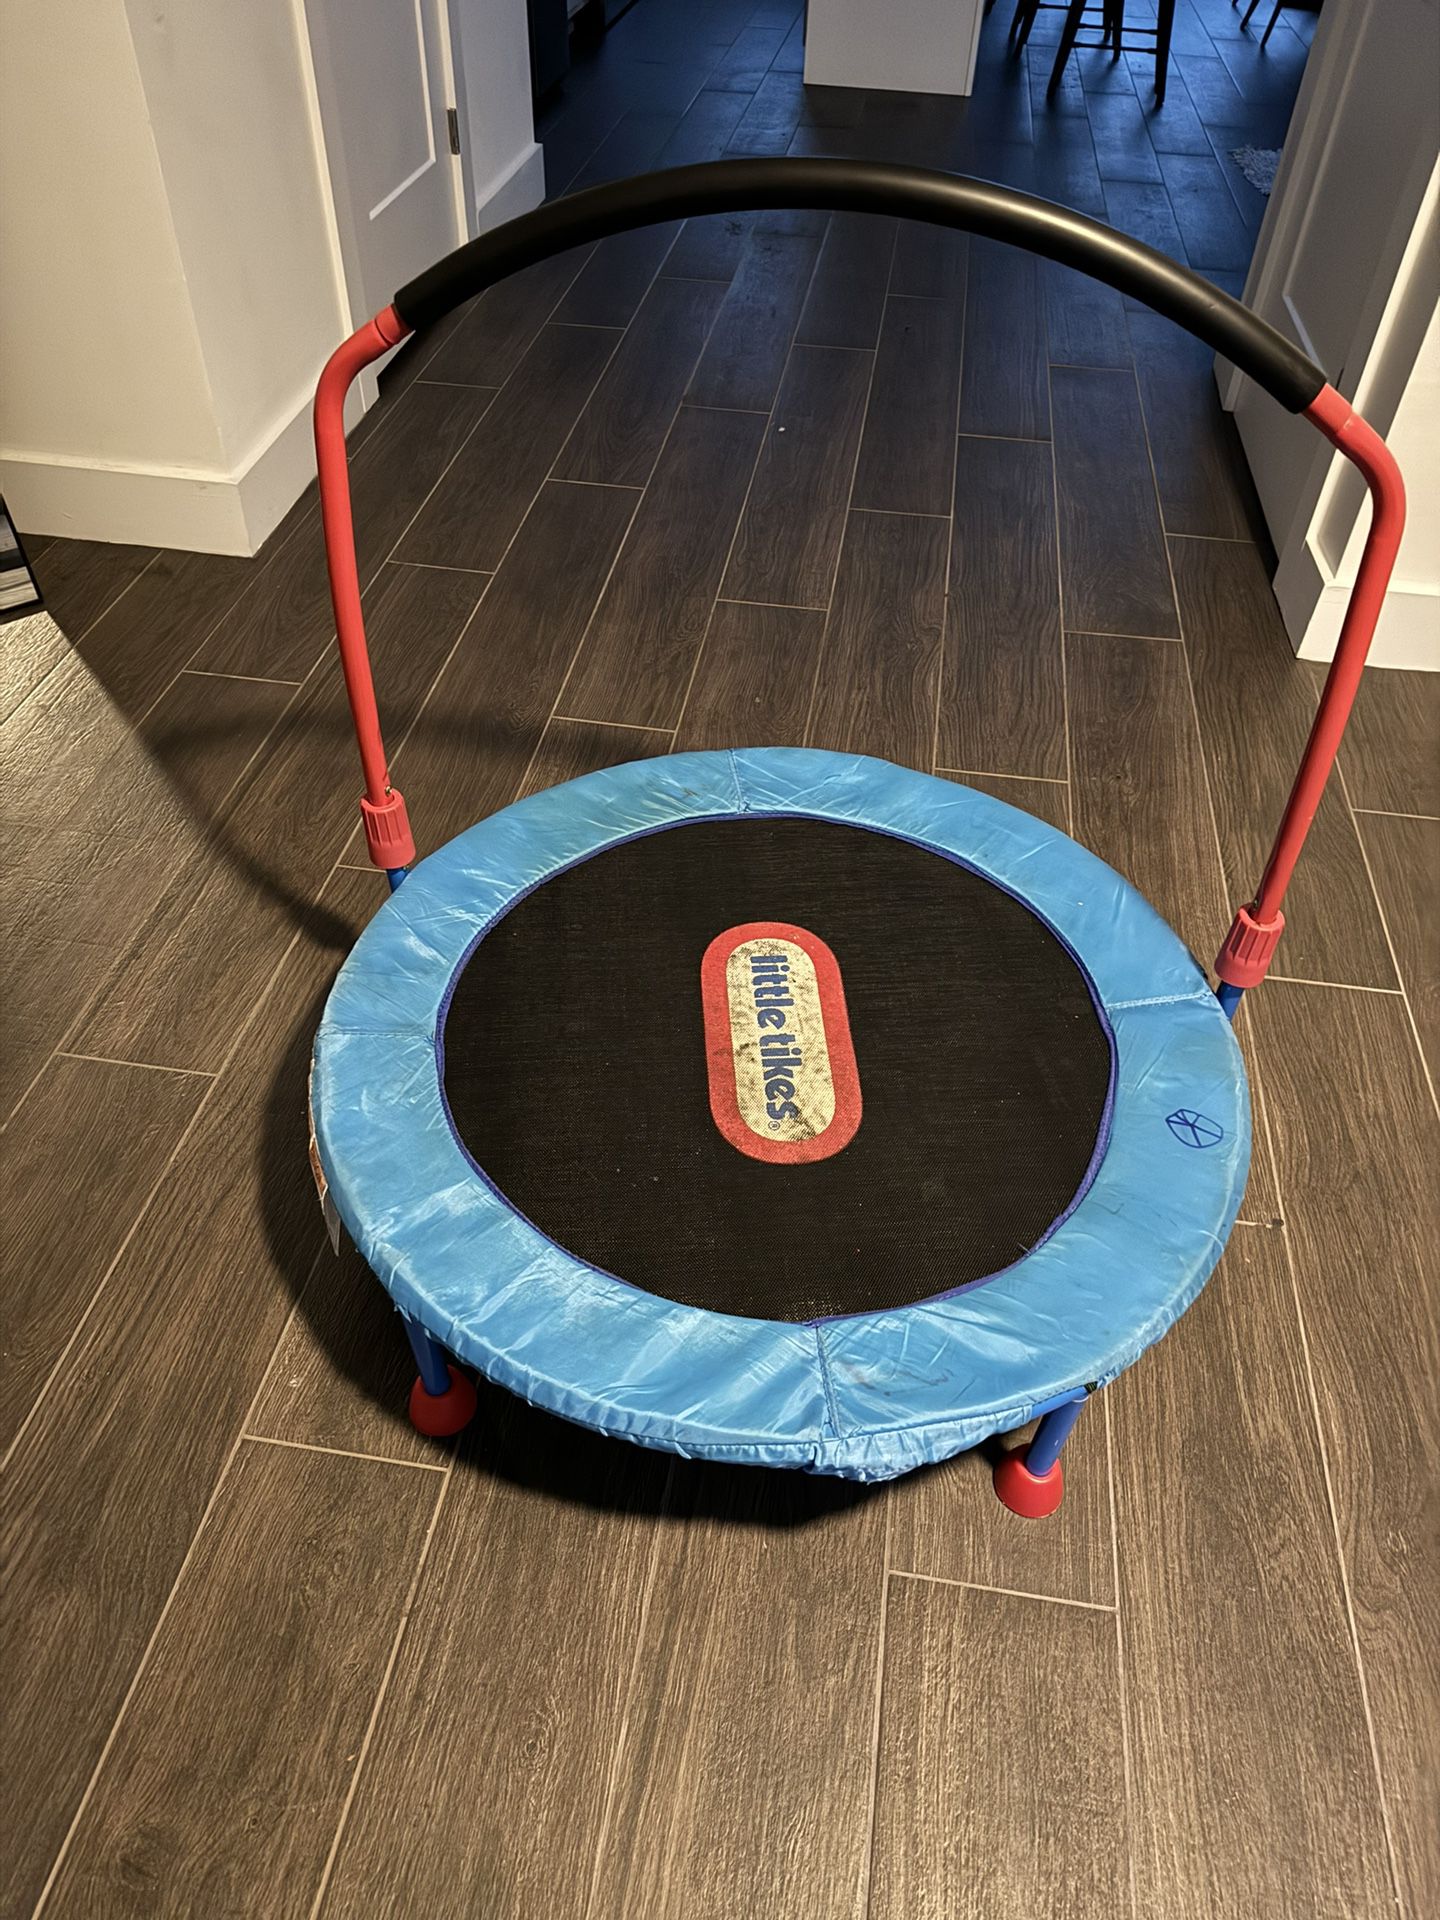 Little Tykes Trampoline (toddlers Size)